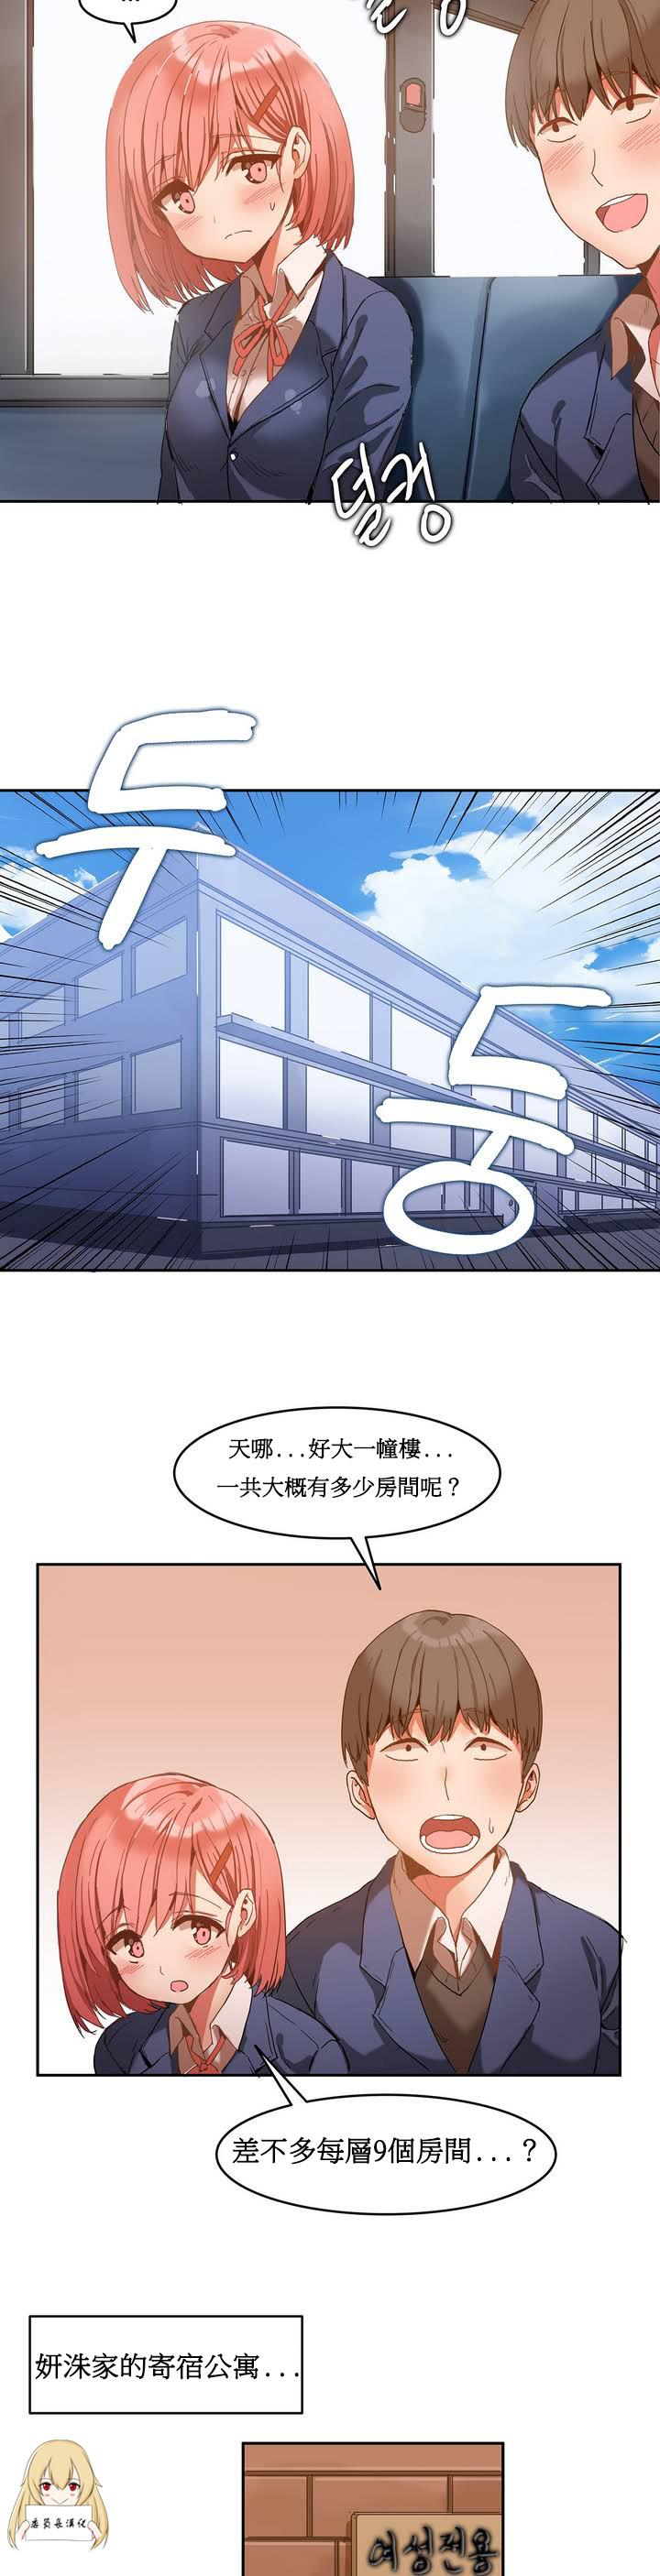 Adorable Hahri's Lumpy Boardhouse Ch. 1~14【委員長個人漢化】（持續更新） Fuck Me Hard - Page 11